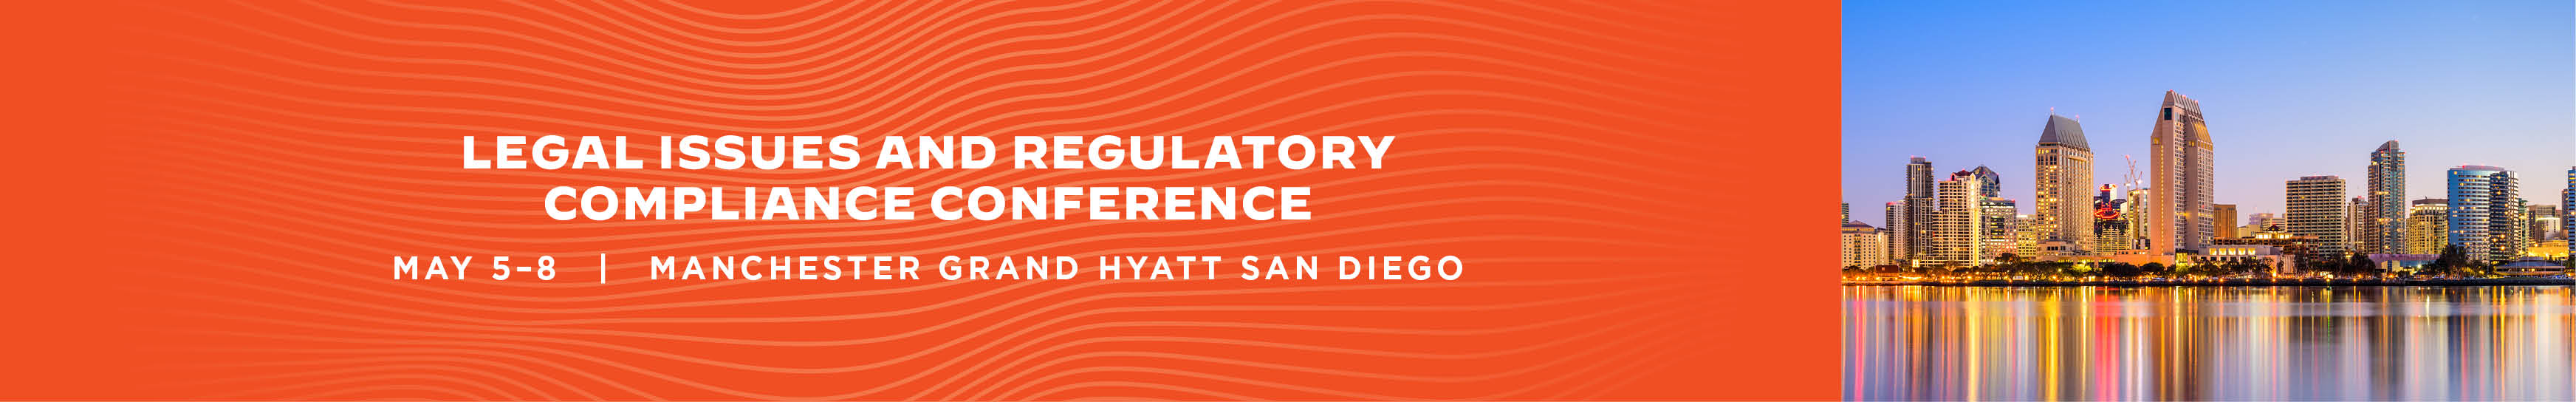 Header Graphic - Legal Issues and Regulatory Compliance Conference